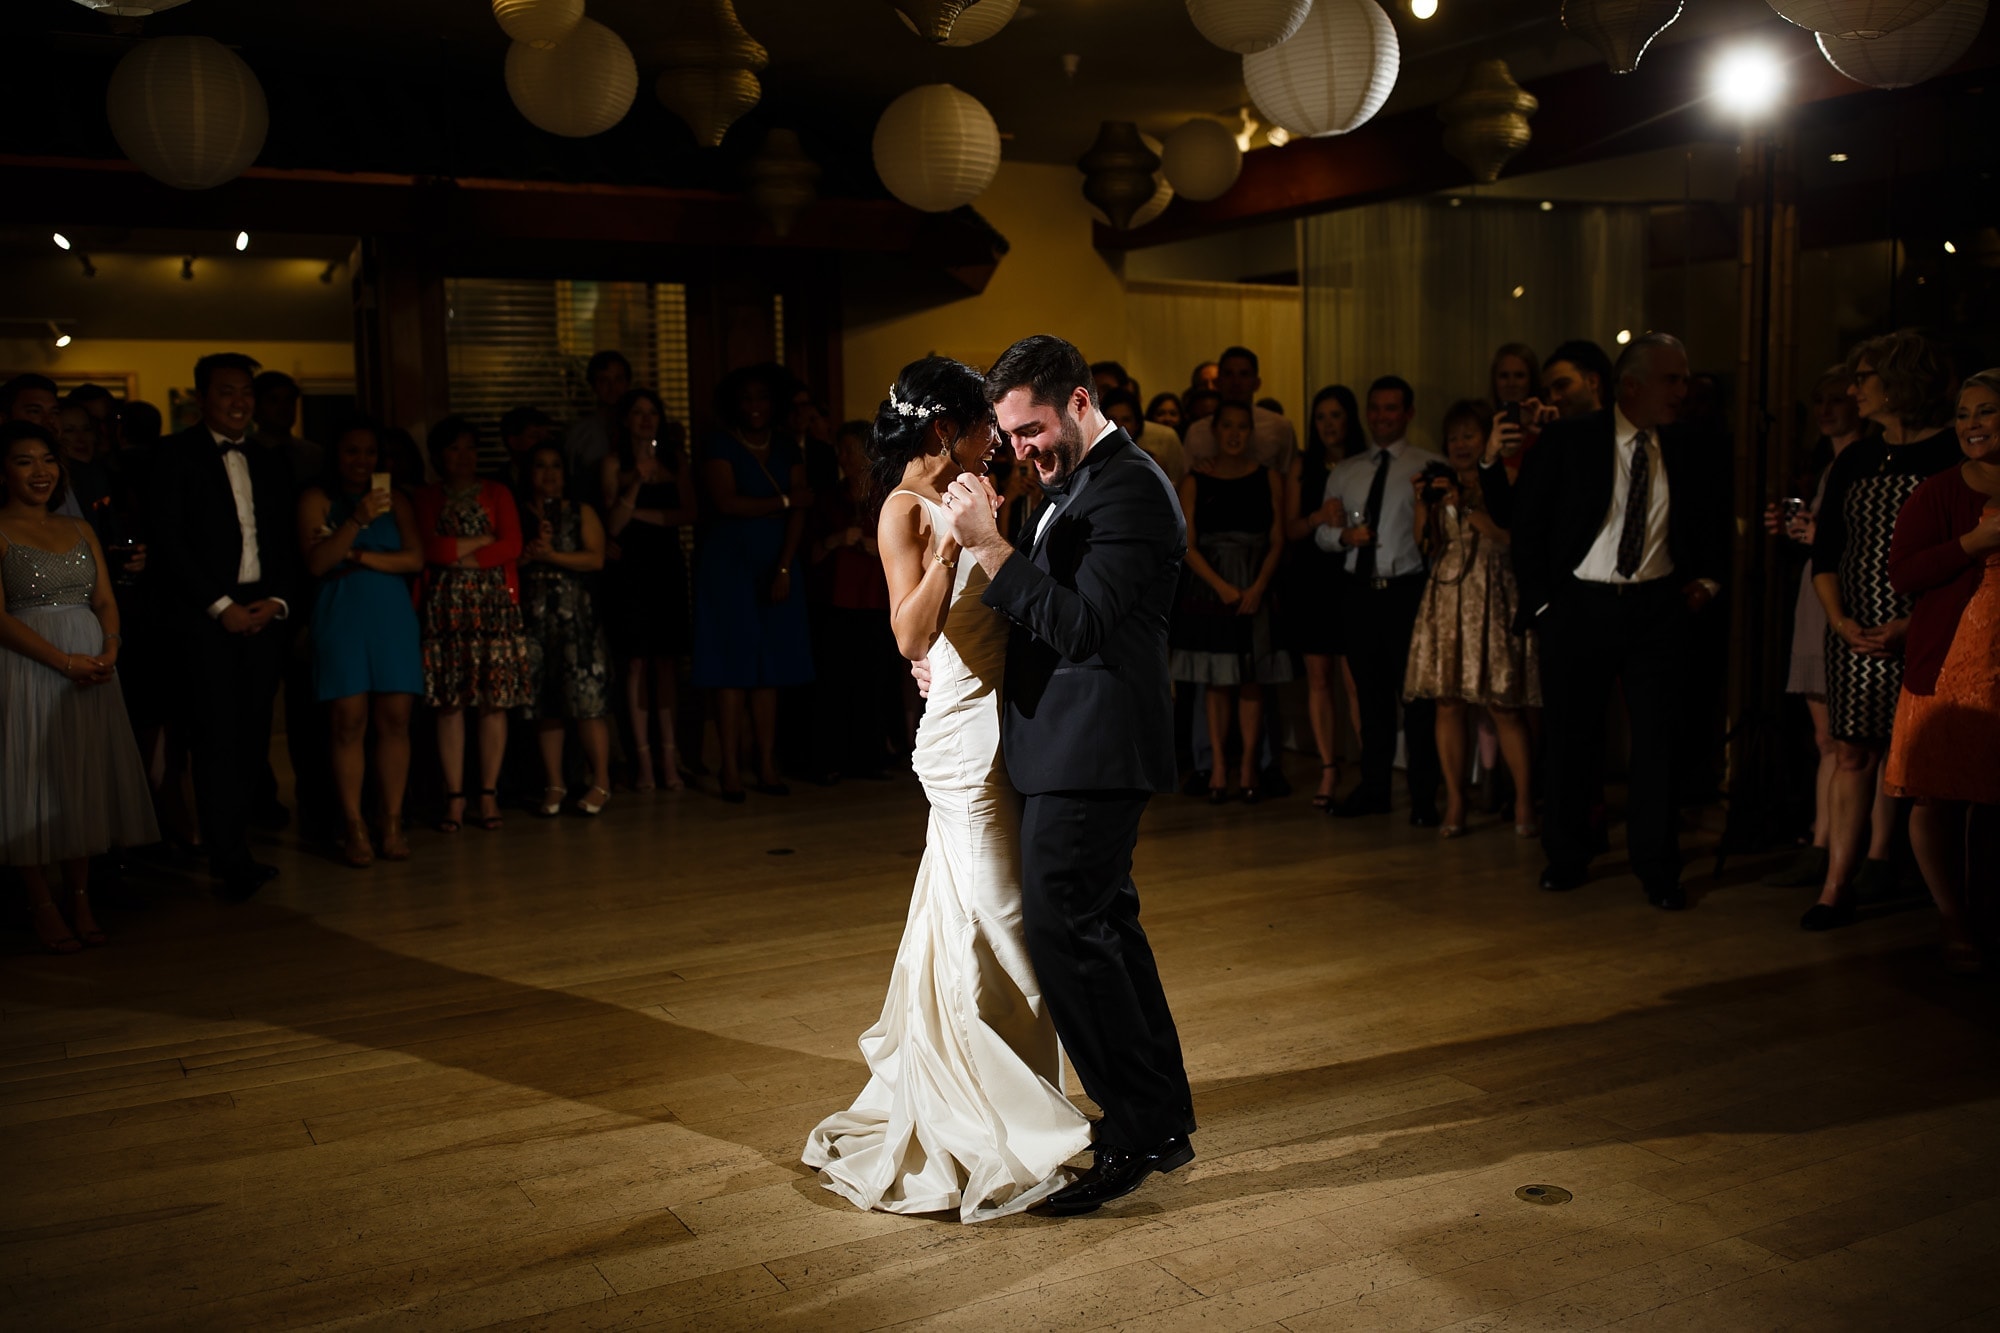 The bride and groom share their first dance on the third floor at Rembrandt Yard during their wedding reception